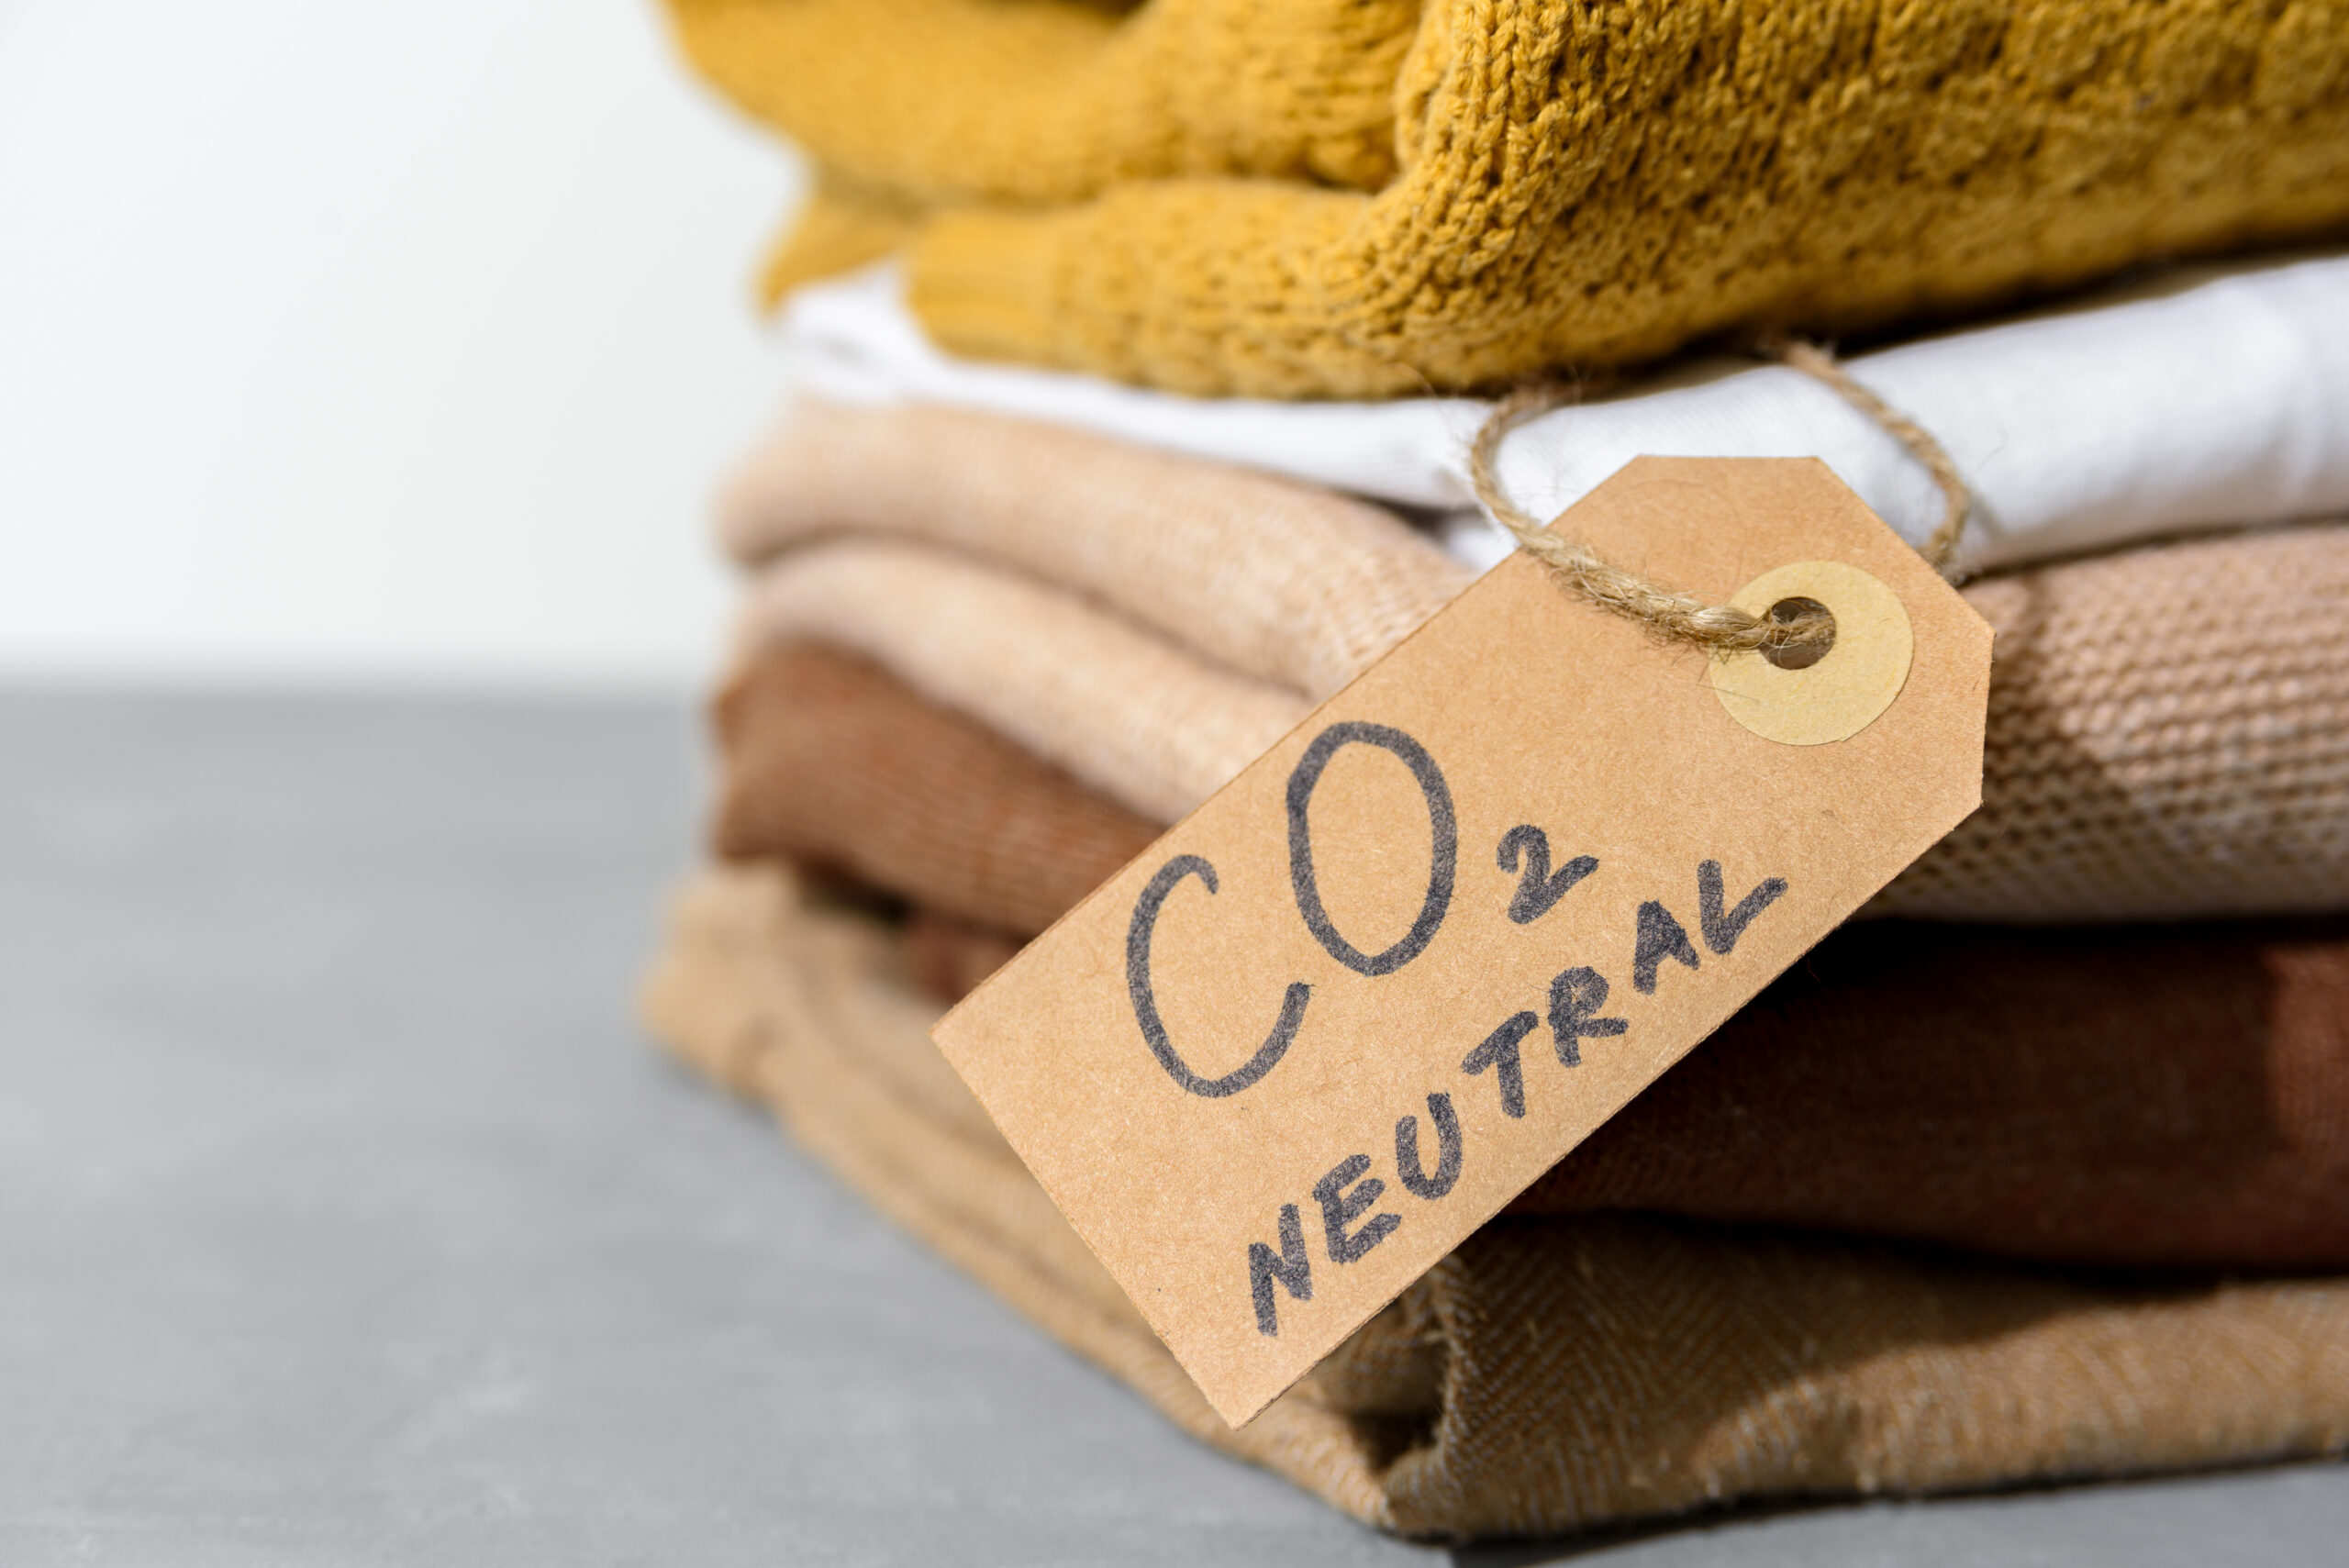 Consumers' opinion on carbon neutral product labels